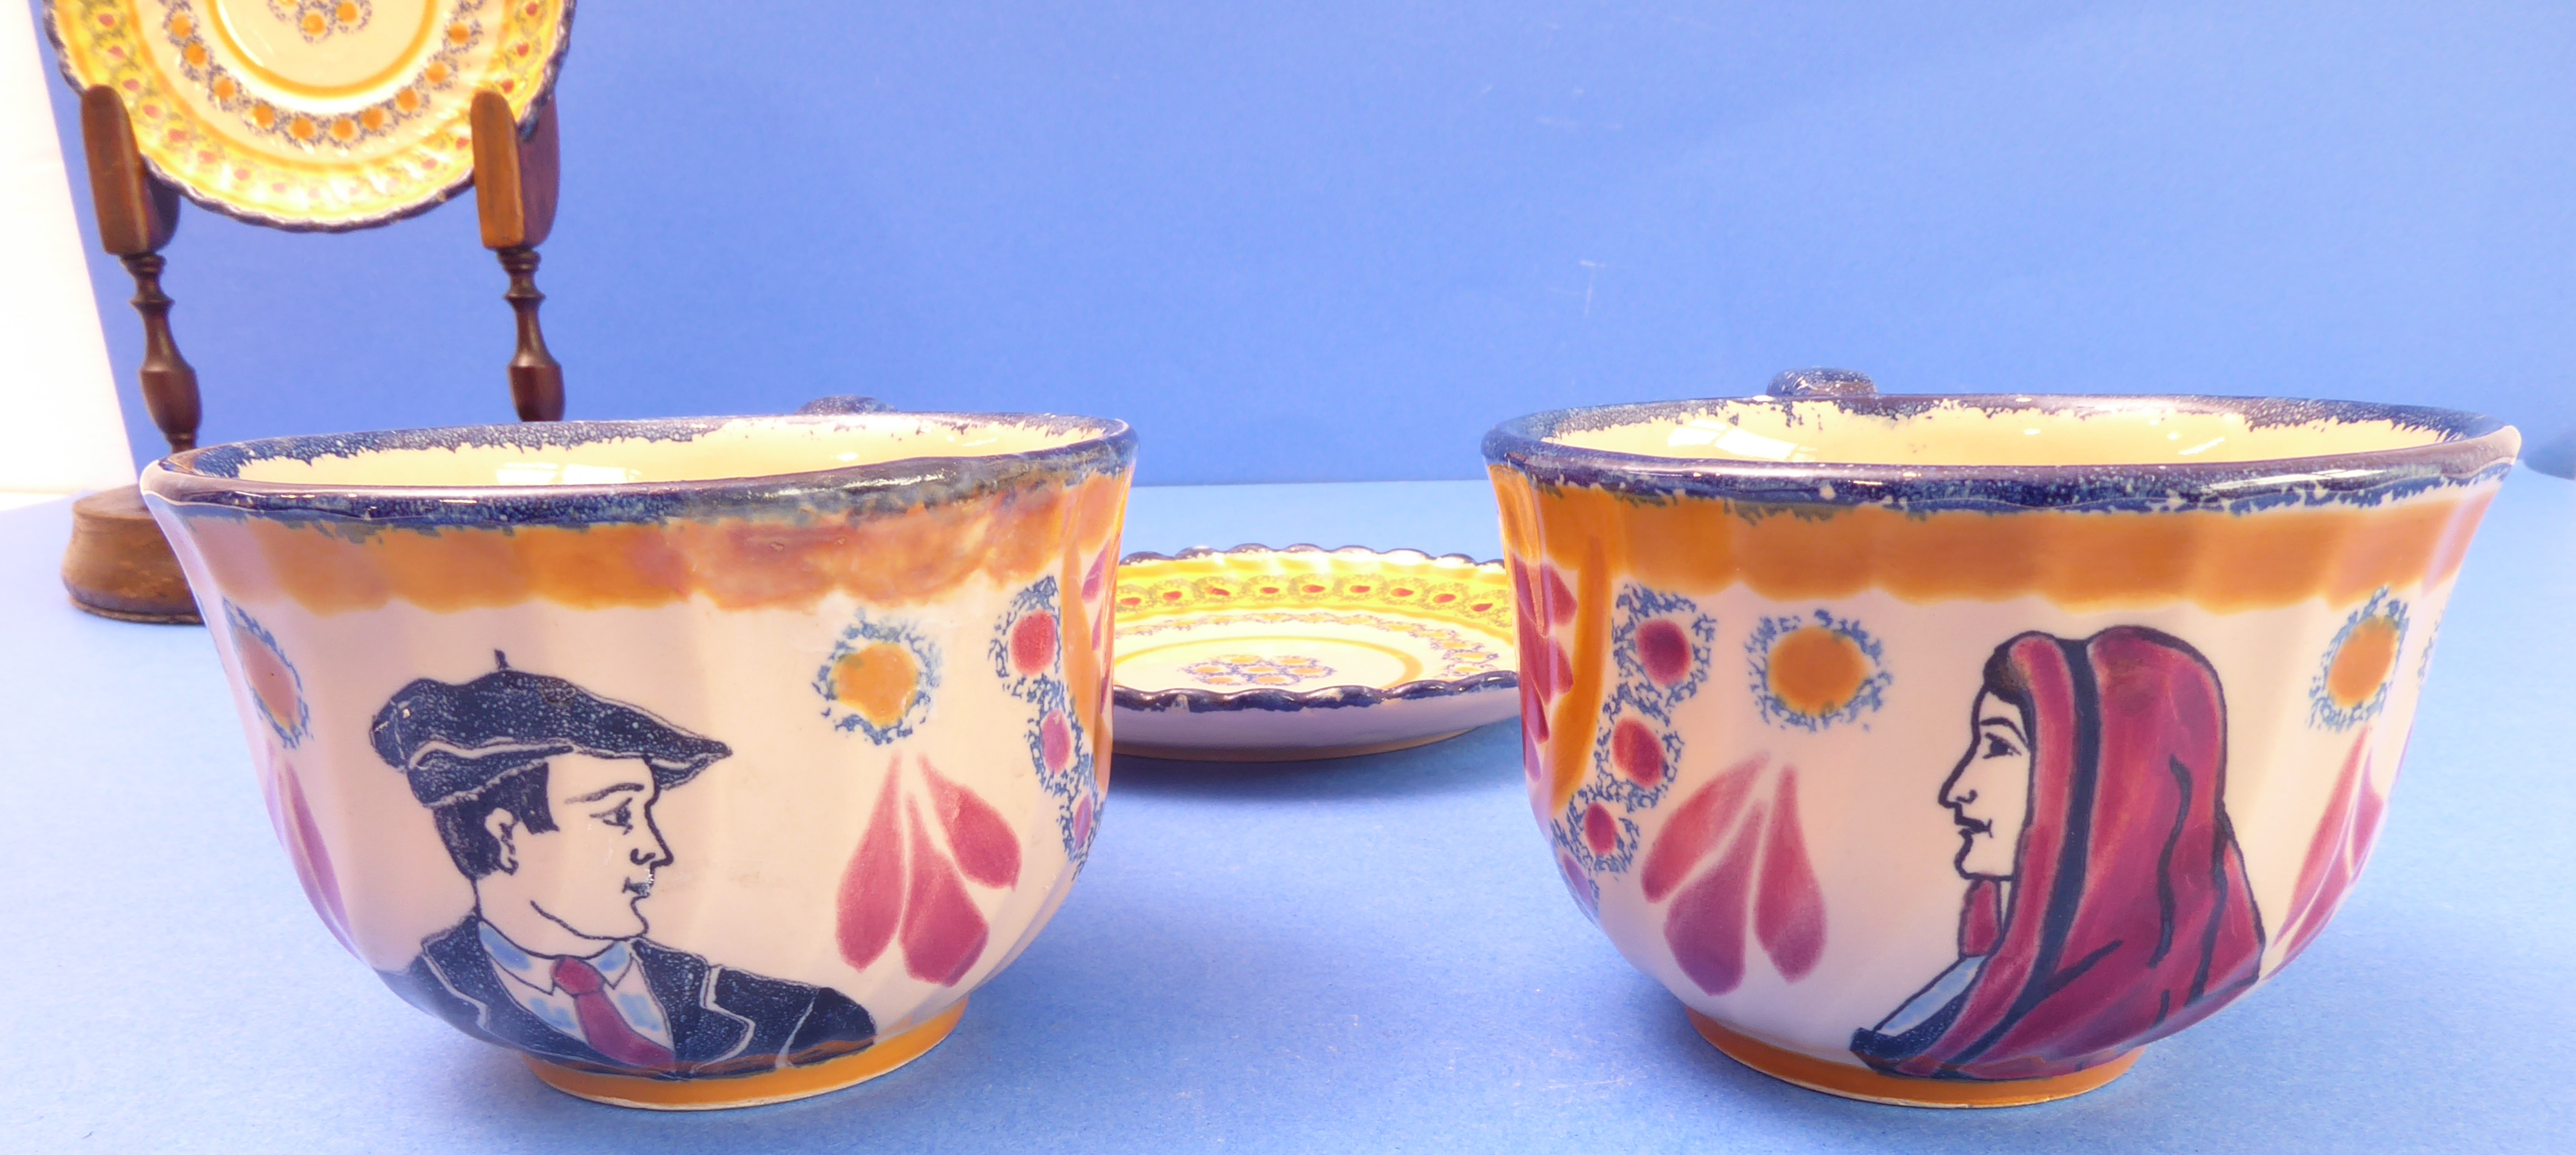 A pair of 1930s French Art Deco cups and saucers signed Luchon; one cup with male figure wearing a - Image 3 of 4